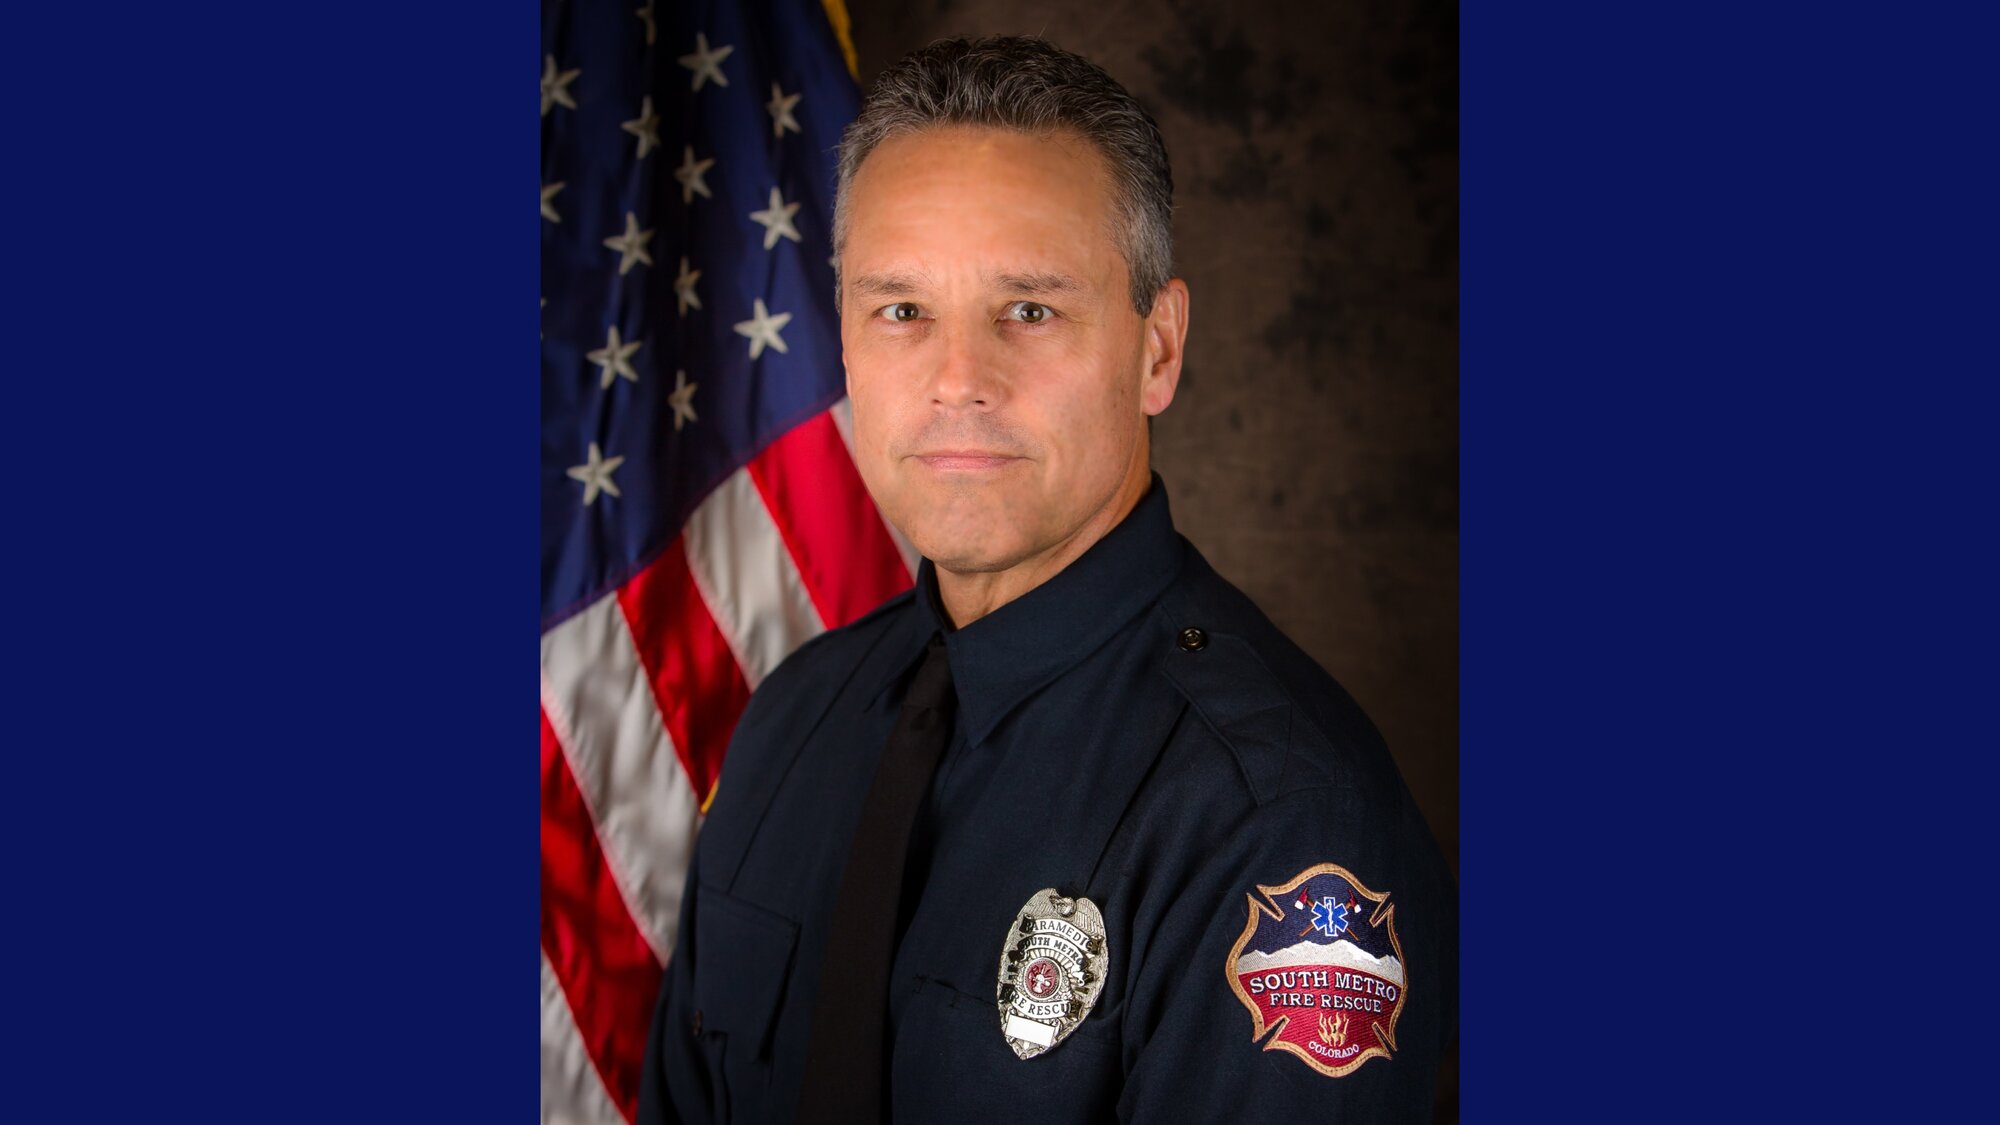 Colorado firefighter paramedic’s death highlights cancer risk first responders face [Video]